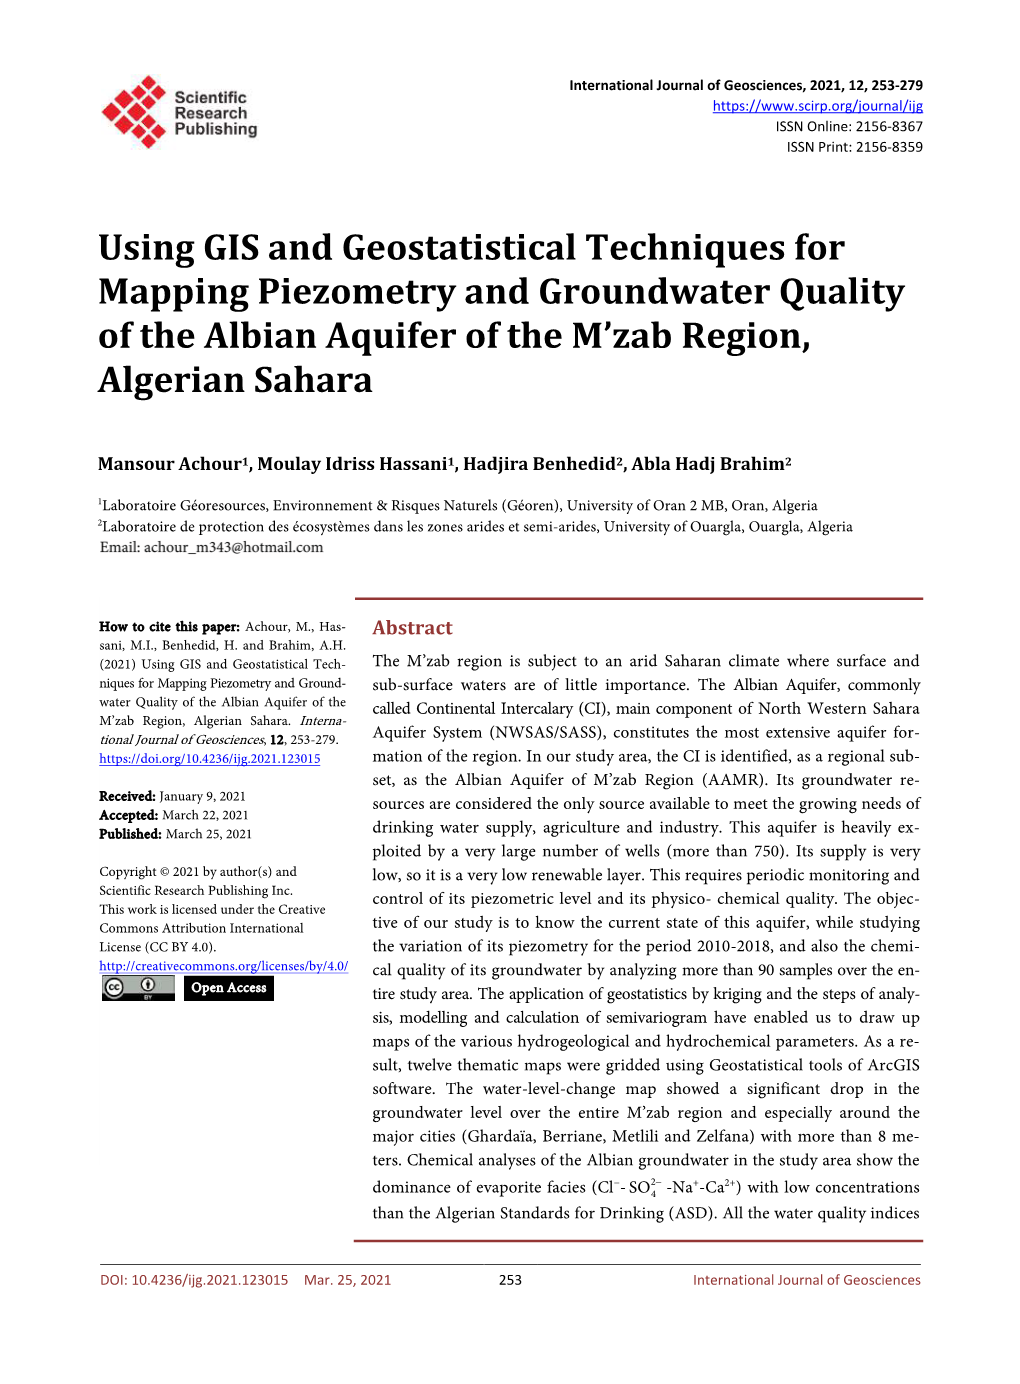 Using GIS and Geostatistical Techniques for Mapping Piezometry and Groundwater Quality of the Albian Aquifer of the M’Zab Region, Algerian Sahara